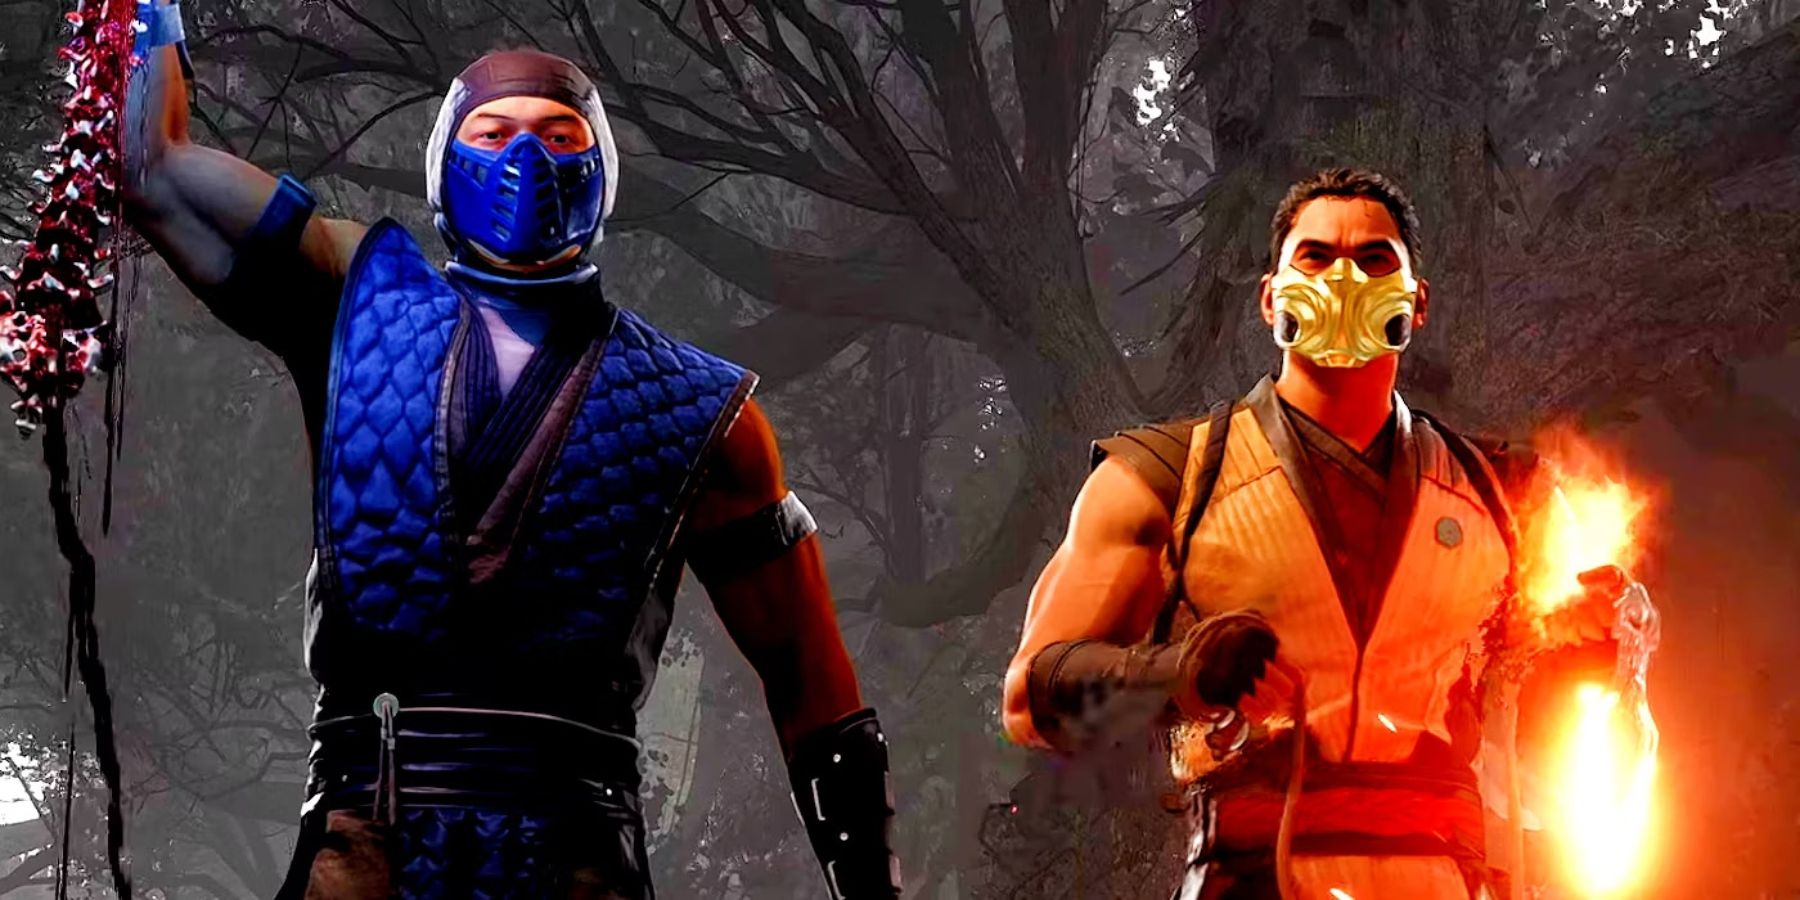 The Realm Kast: Mortal Kombat Online on X: 🔥 Klassic Kano fatalities vs  the #MortalKombat1 fatalities! Which one is more brutal? Let's find out! 💀  #MKFatalityFaceoff #Kano #MortalKombat  / X